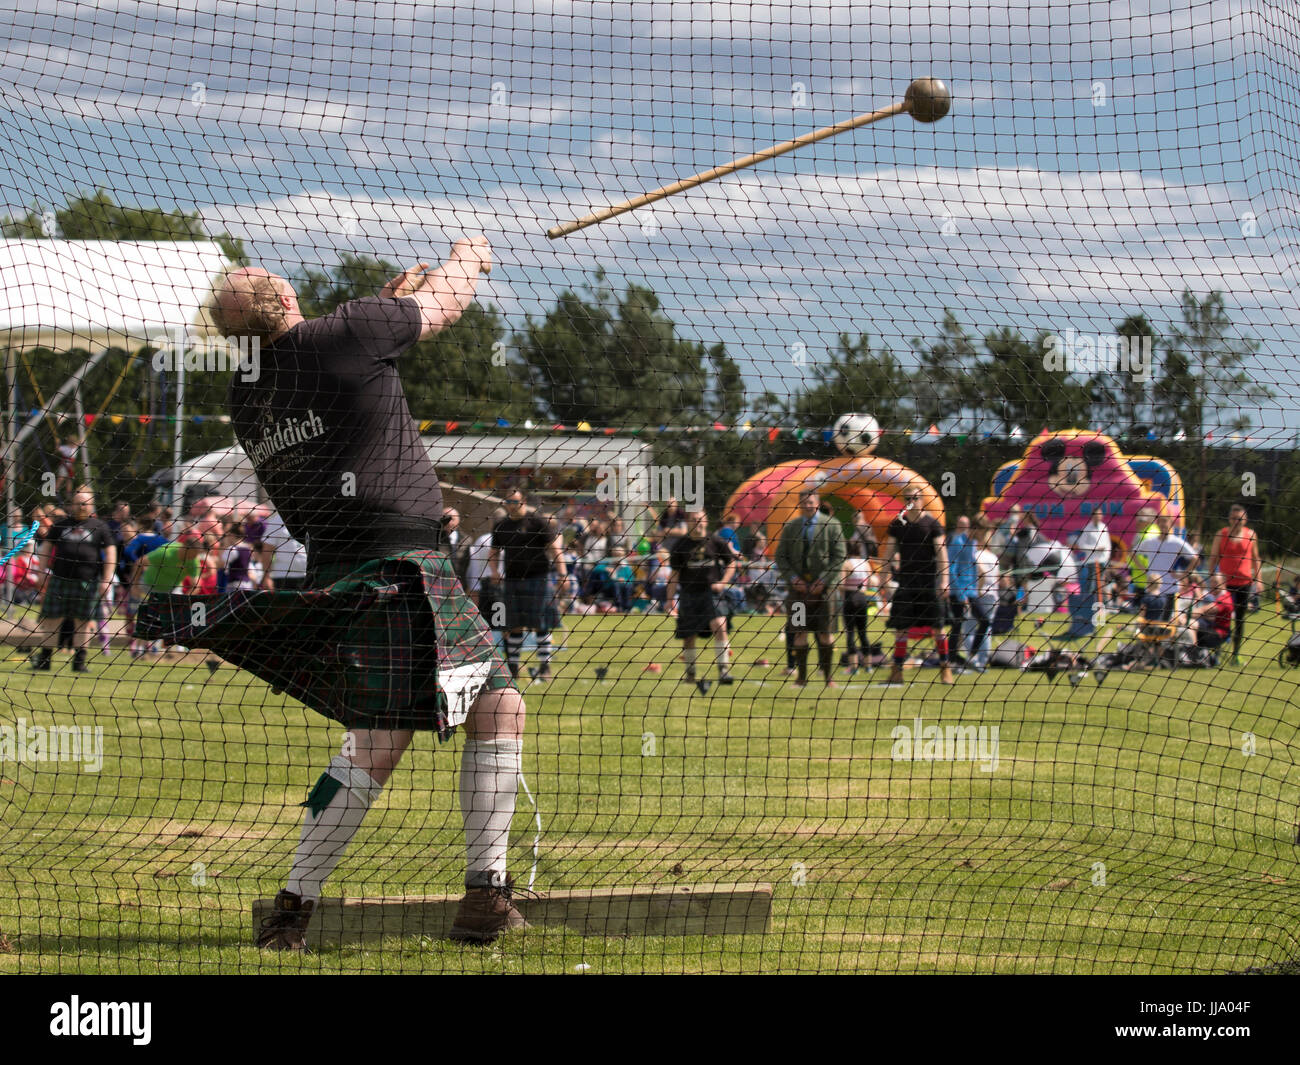 Stonehaven, Scotland - 16 July 2017: A competitor in the Hammer Throw at the Highland Games in Stonehaven, Scotland. Stock Photo